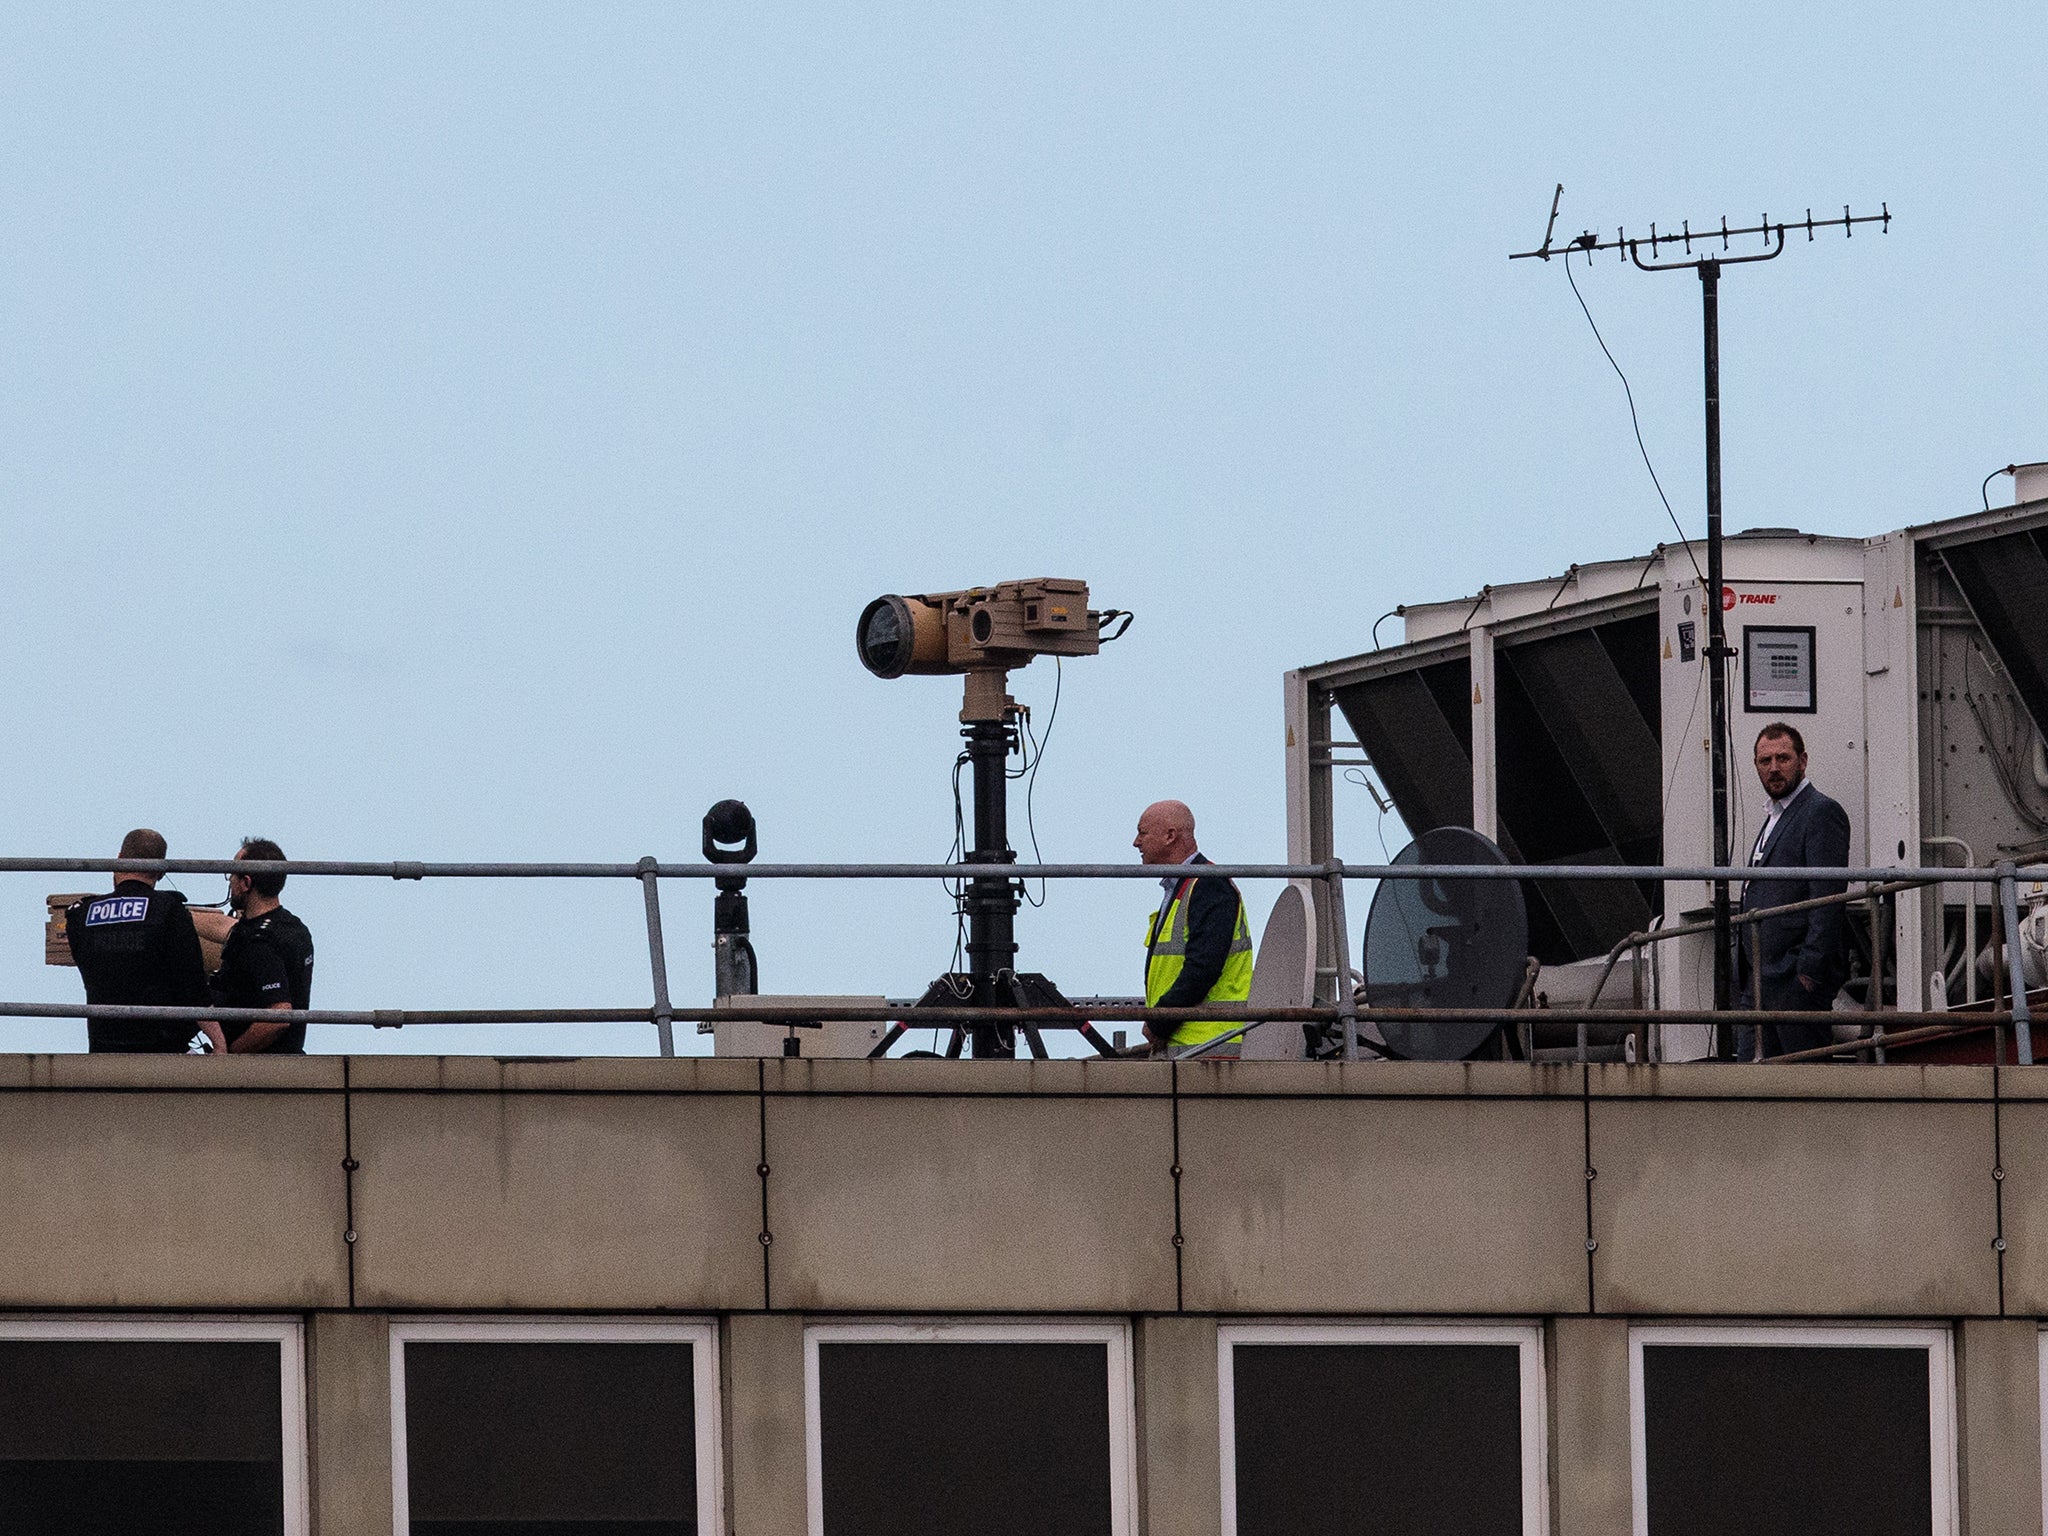 The army's Israeli-developed Drone Dome system is thought to have been deployed on Gatwick's roof